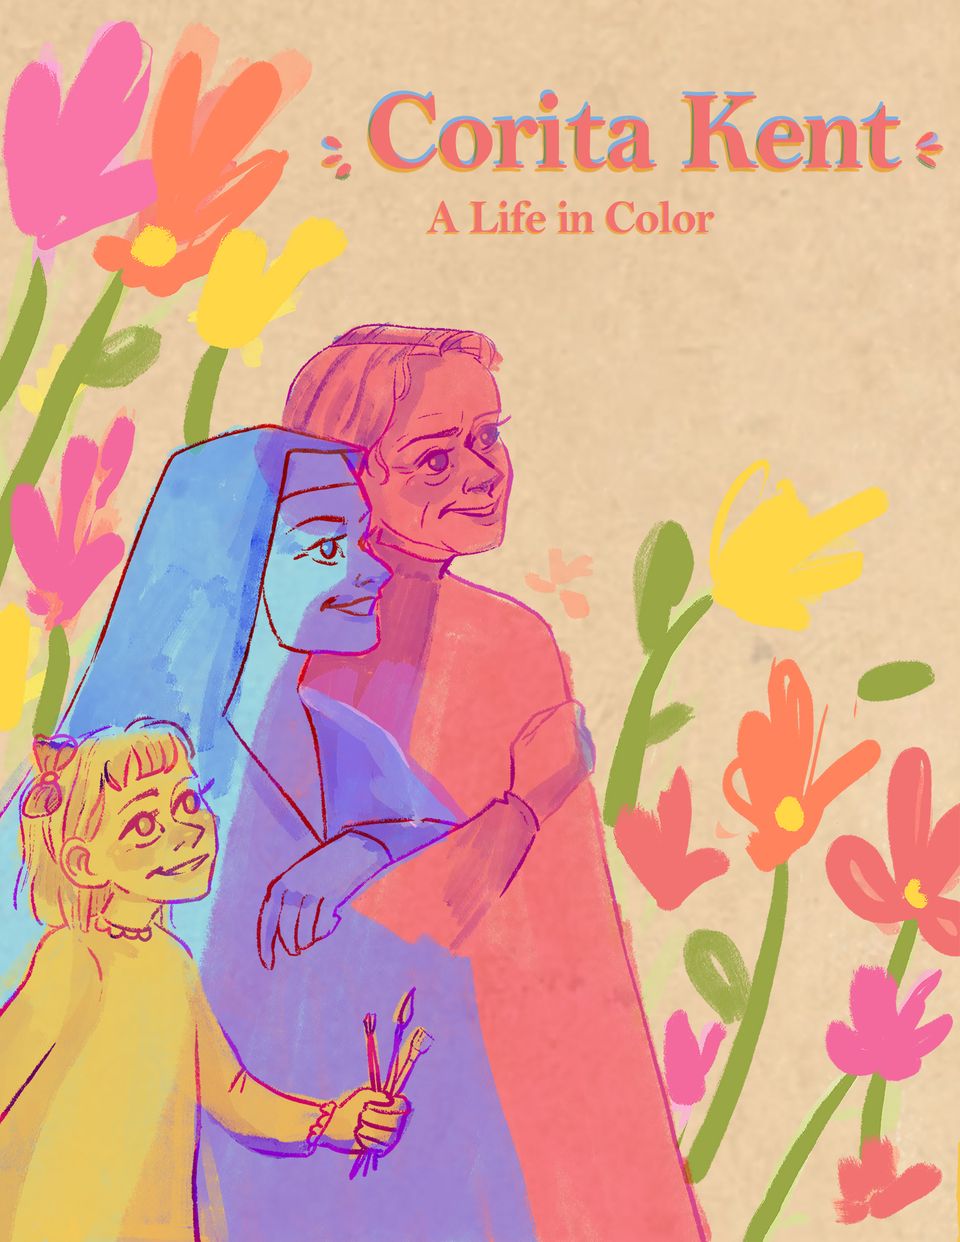 A Life in Color: A Comic About Corita Kent, cover